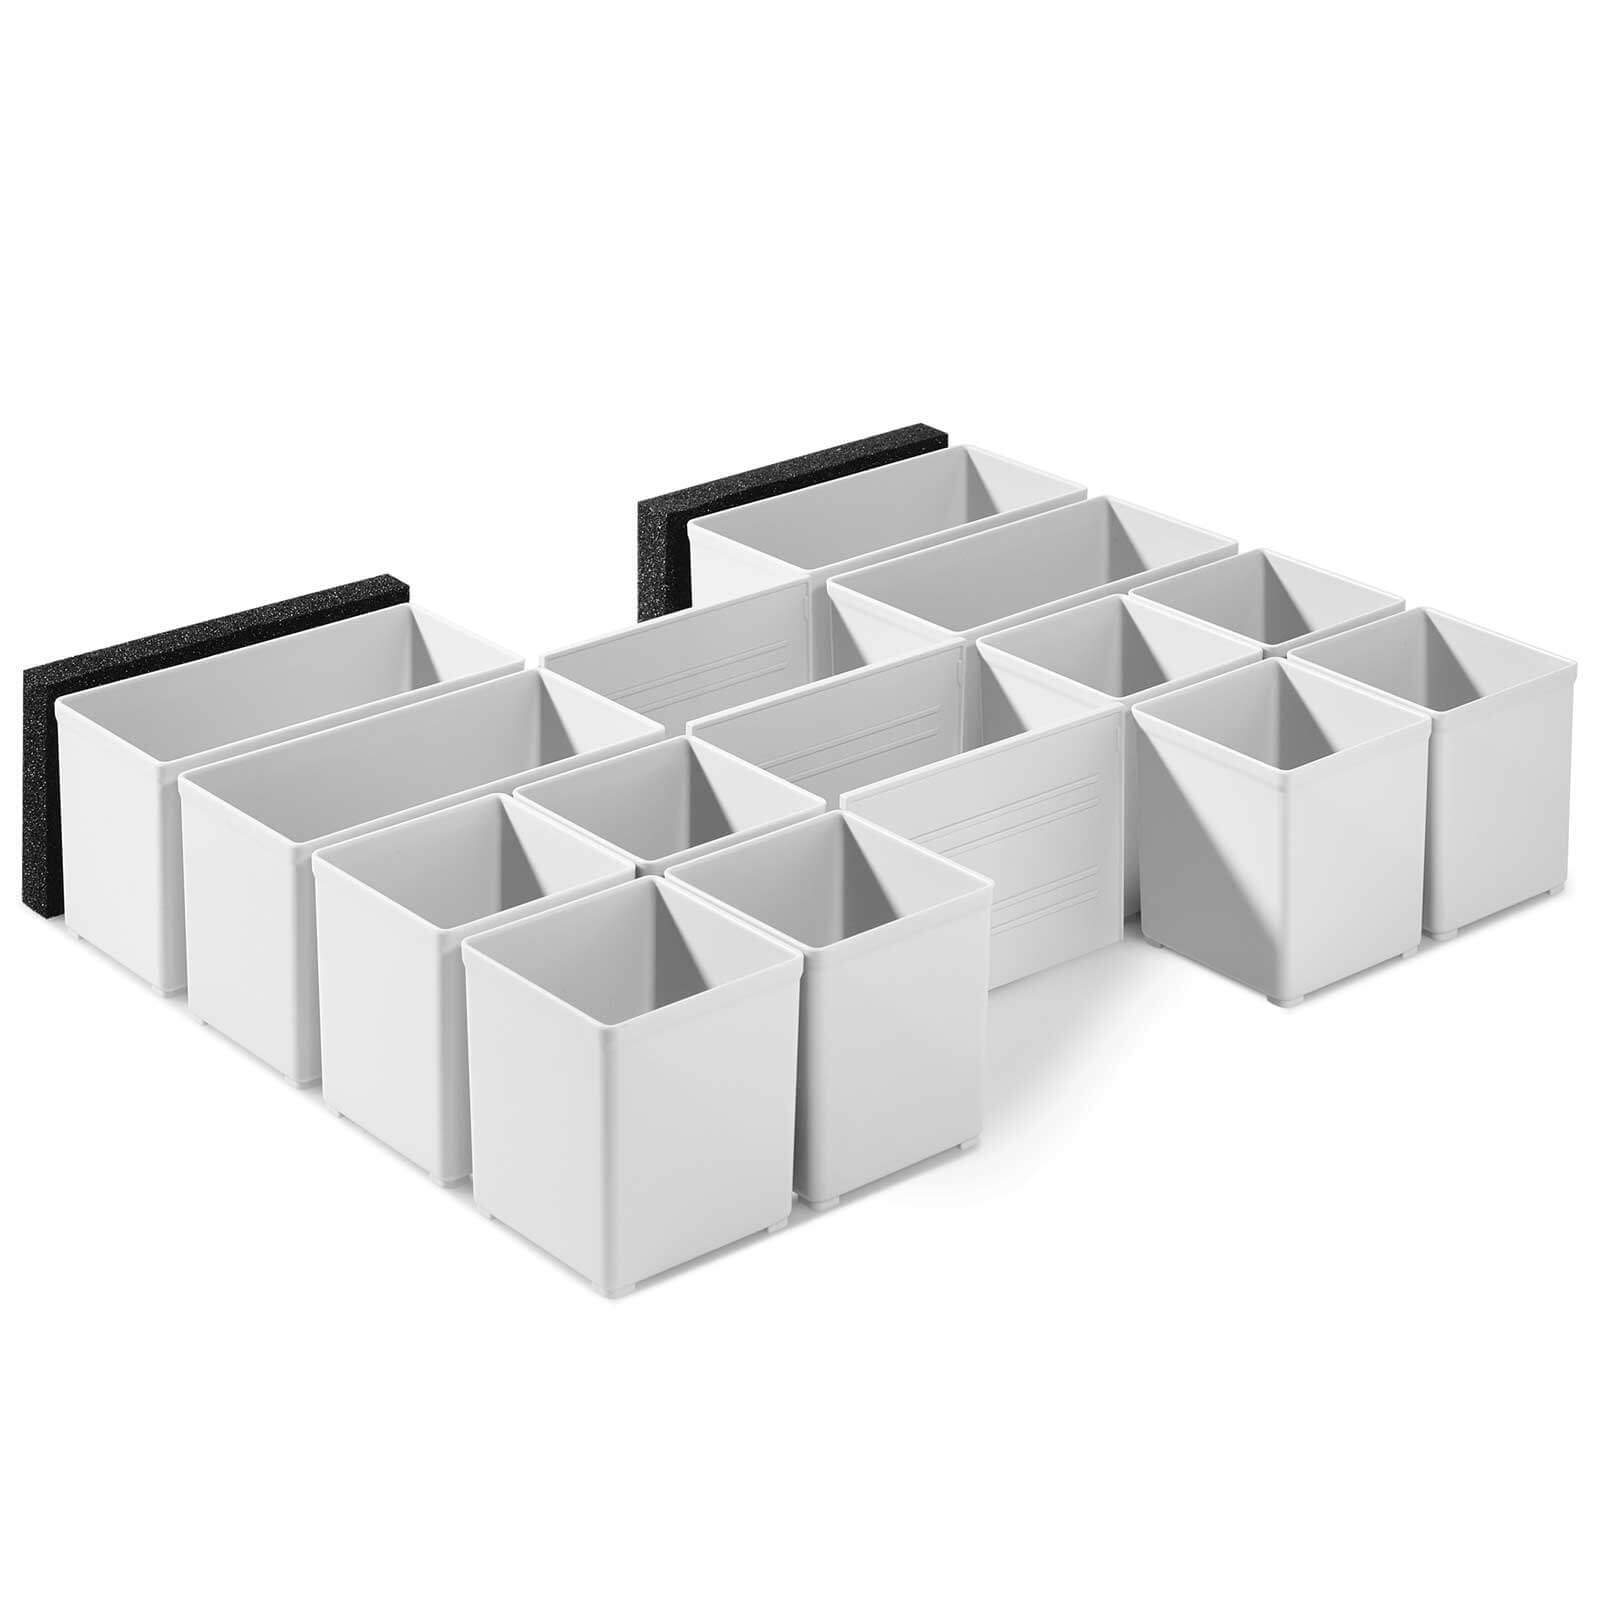 Image of Festool Systainer Insert Boxes Set